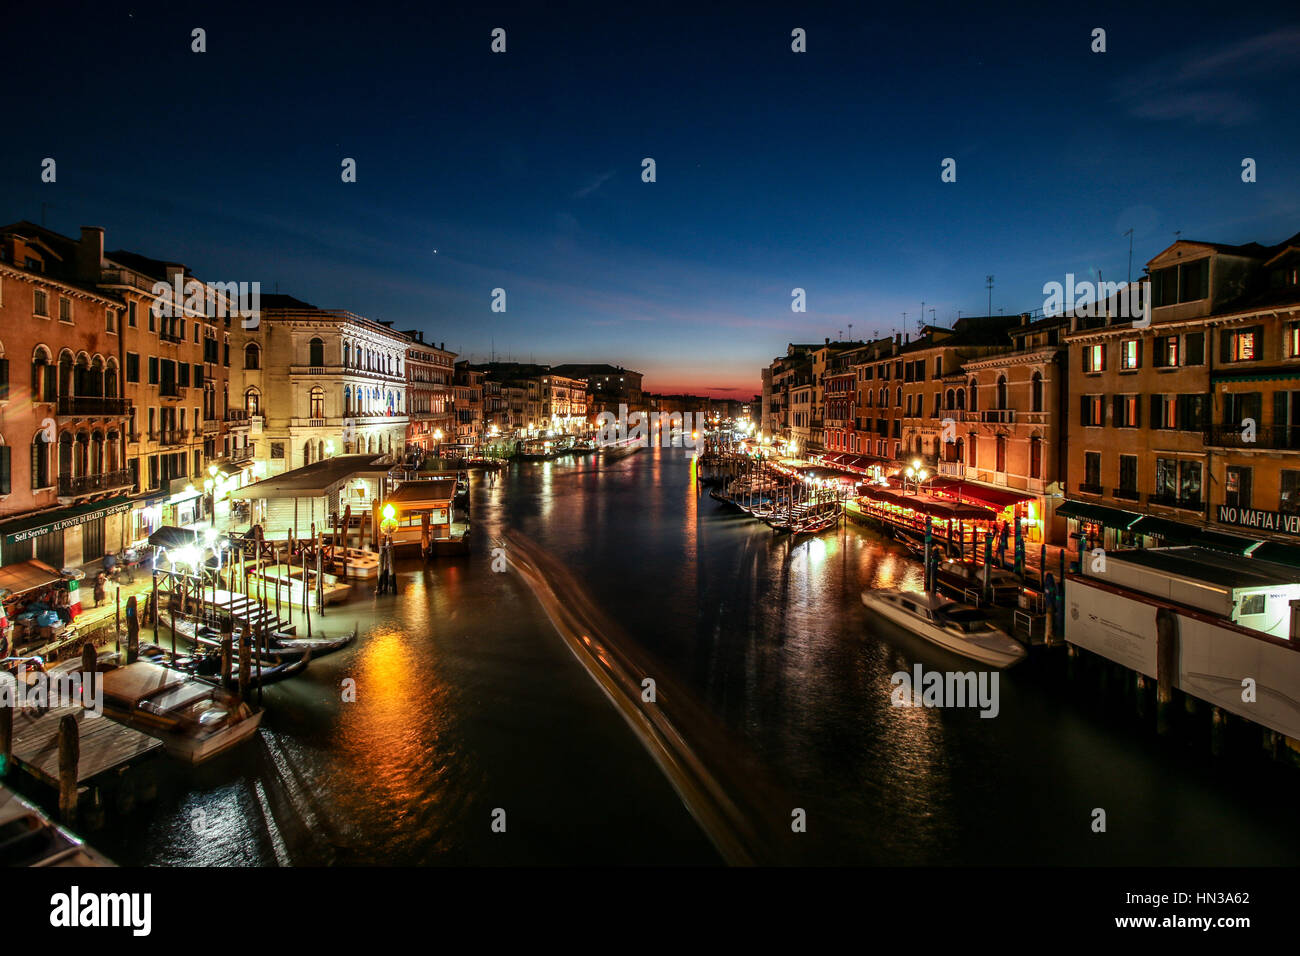 Sunset from the Rialto Bridge Venice Italy, long exposure, showing boats and people Stock Photo